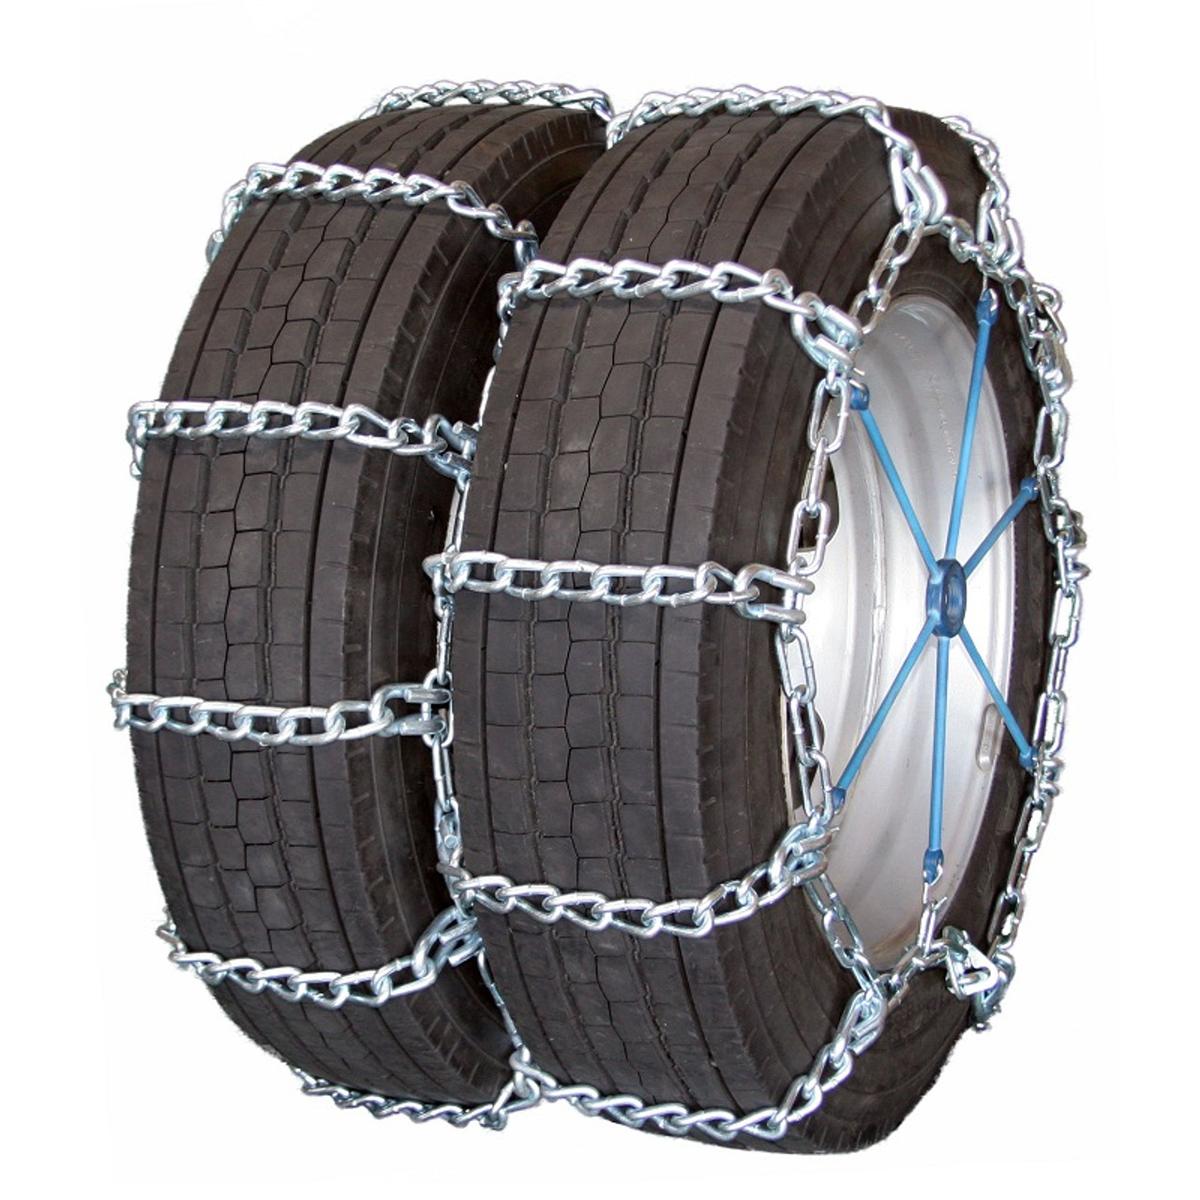 Mud Service Dual 255/80-22.5 Truck Tire Chains